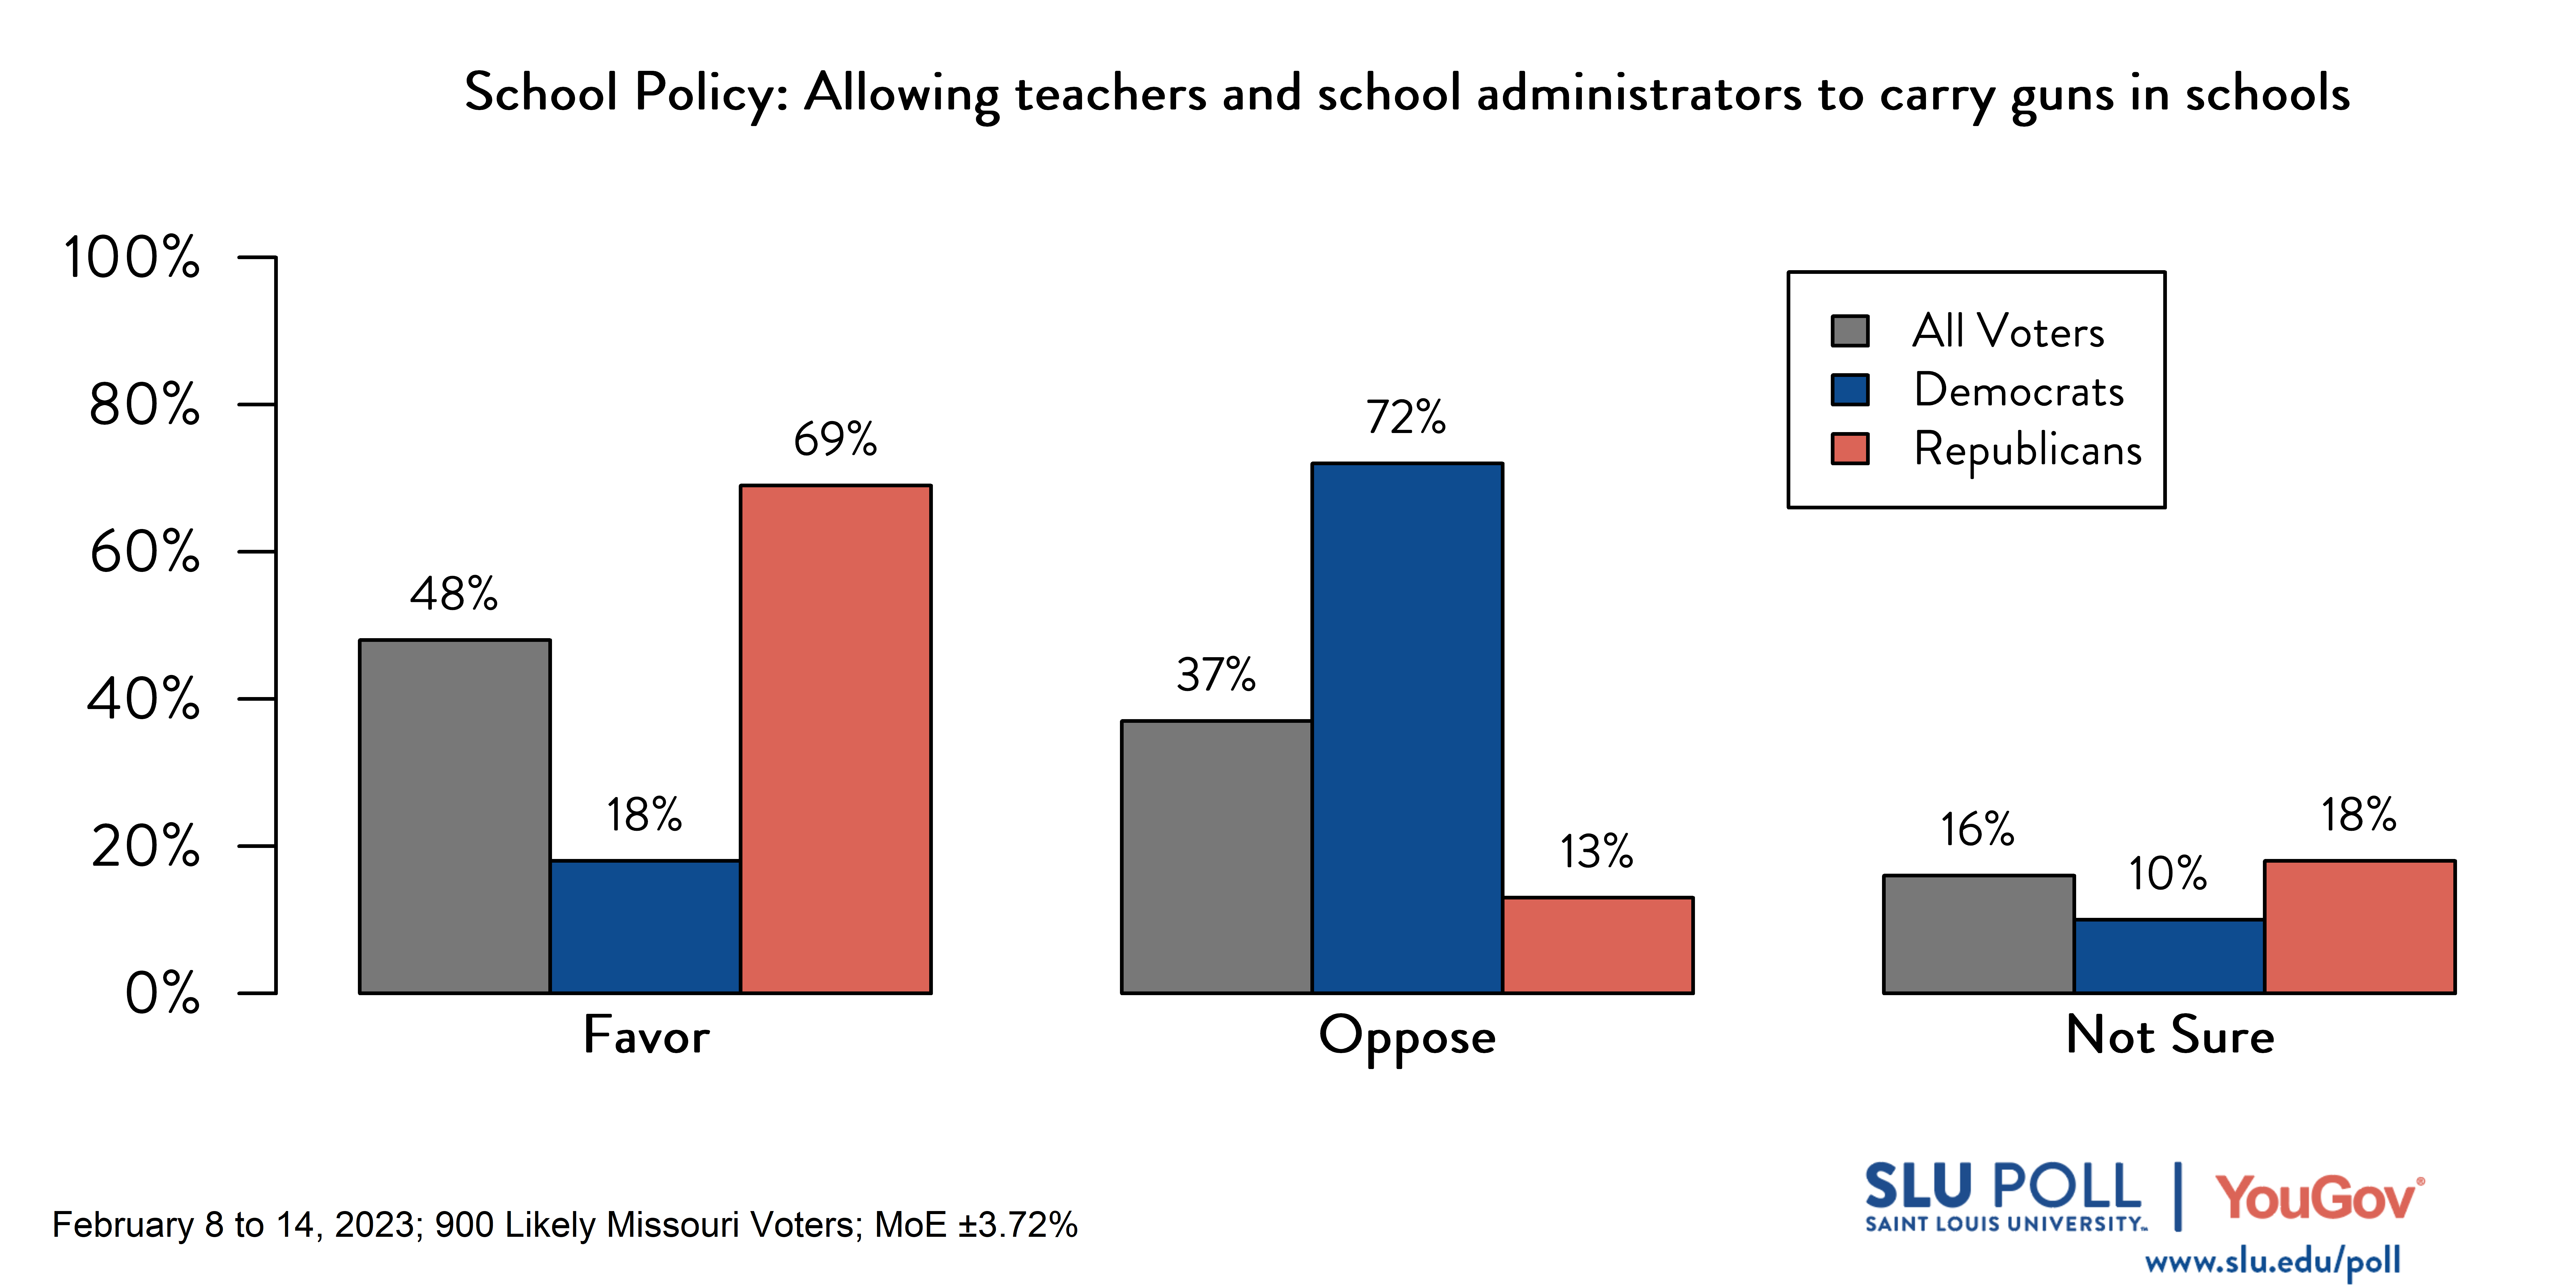 Likely voters' responses to 'Do you favor or oppose the following policies in schools: Allowing teachers and school administrators to carry guns in schools?': 48% Favor, 37% Oppose, and 16% Not sure. Democratic voters' responses: ' 18% Favor, 72% Oppose, and 10% Not sure. Republican voters' responses: 69% Favor, 13% Oppose, and 18% Not sure.